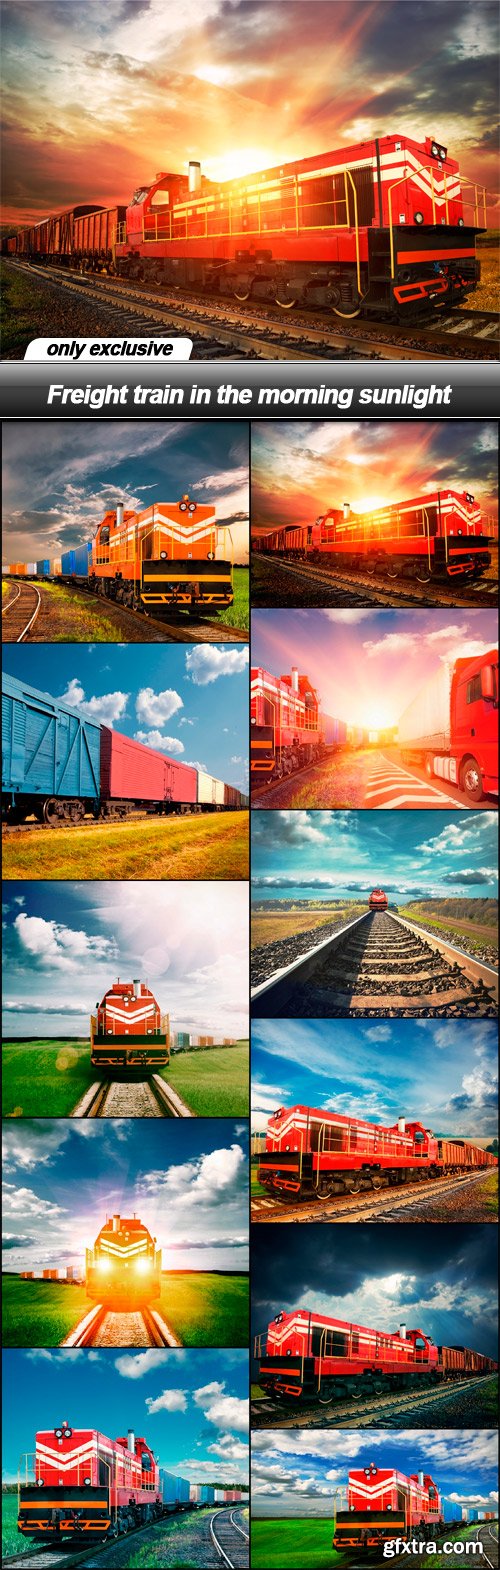 Freight train in the morning sunlight - 11 UHQ JPEG